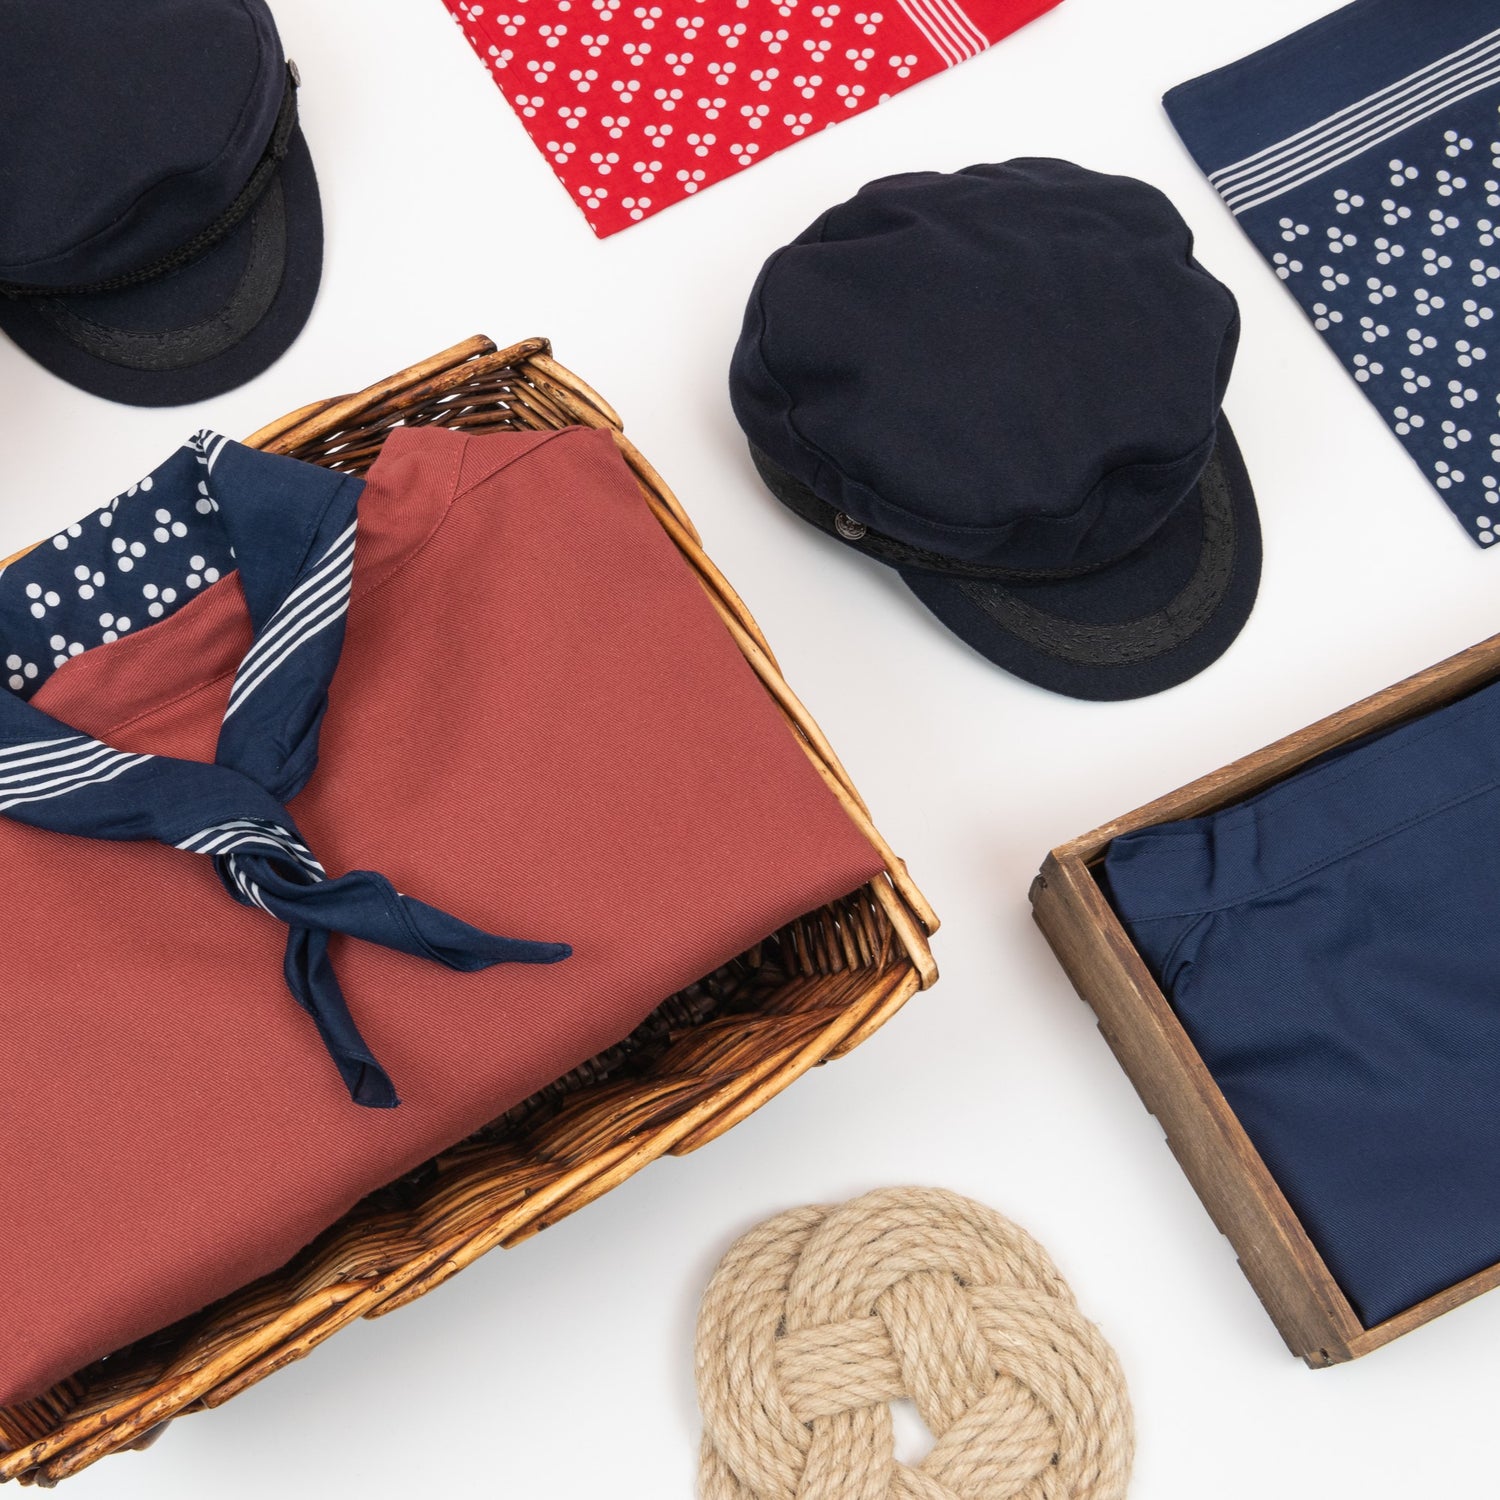 A photo of a selection of nautical-themed clothing and accessories pictured on a white table.